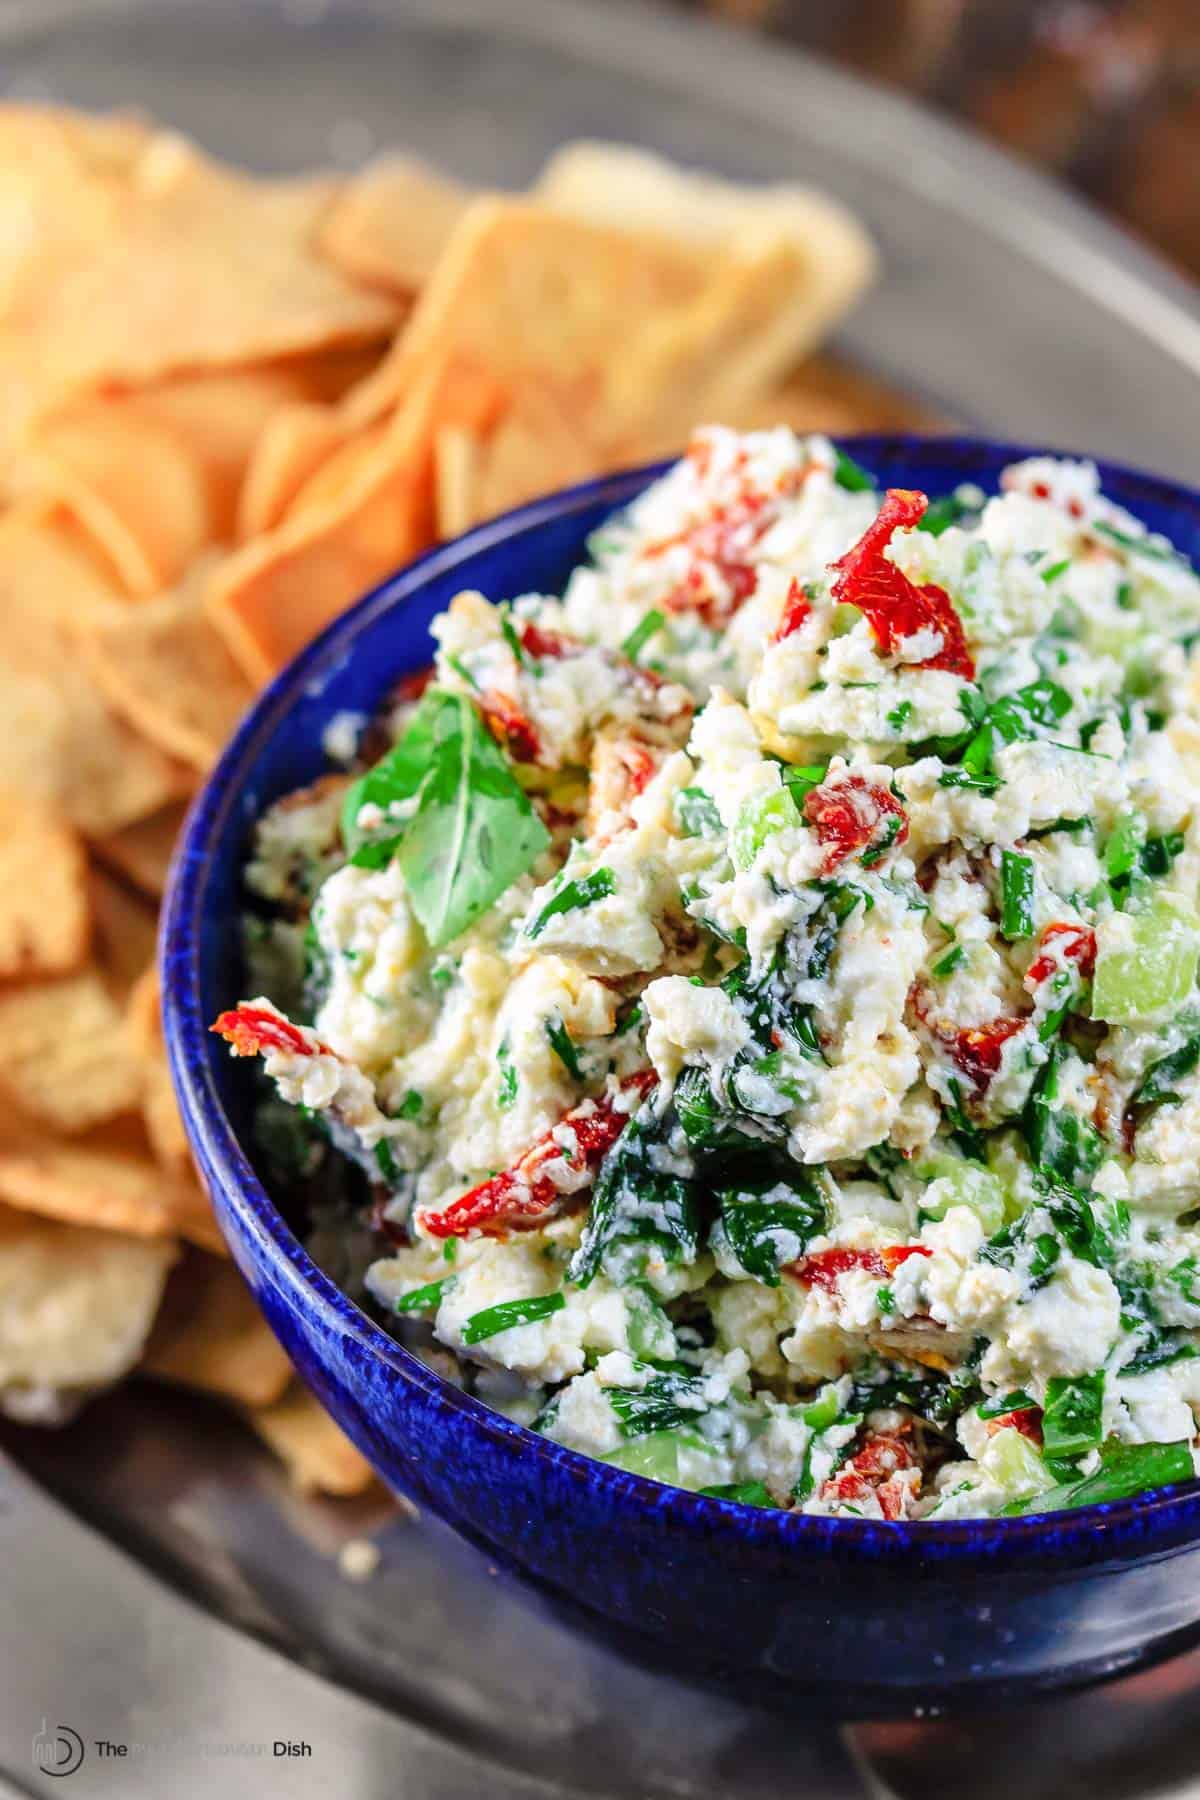 feta dip served with crackers and pita chips